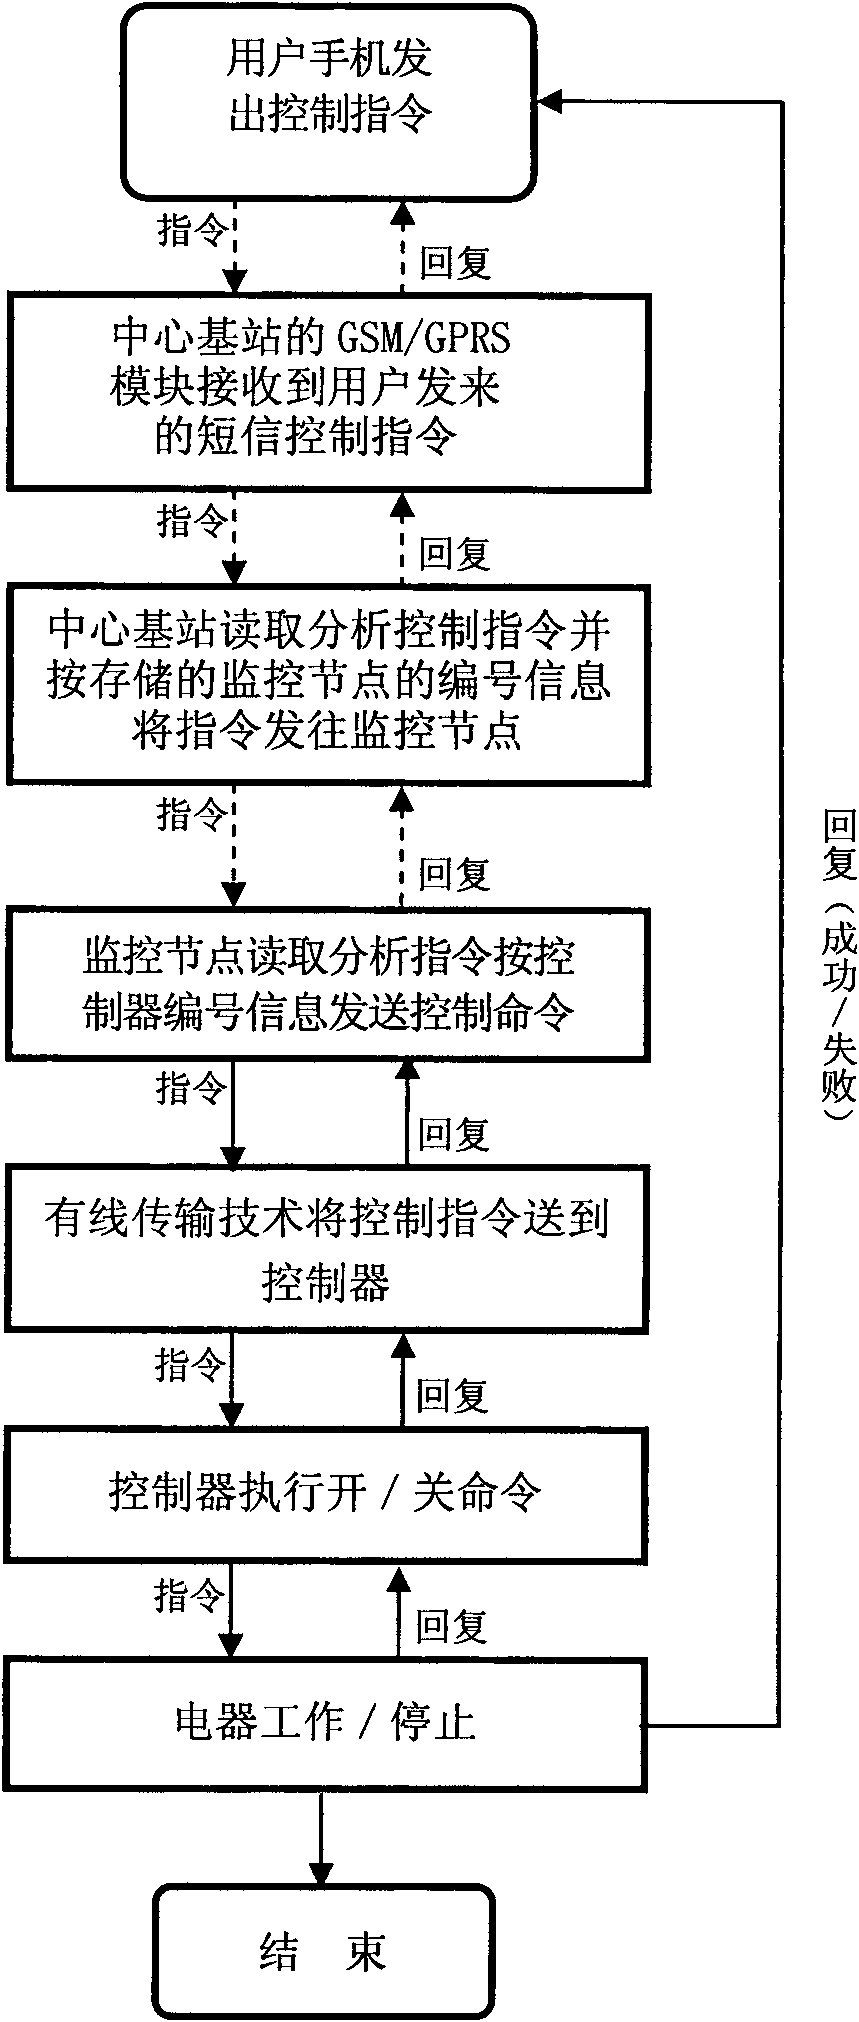 Data transmission and control method for wireless self-organized network control system